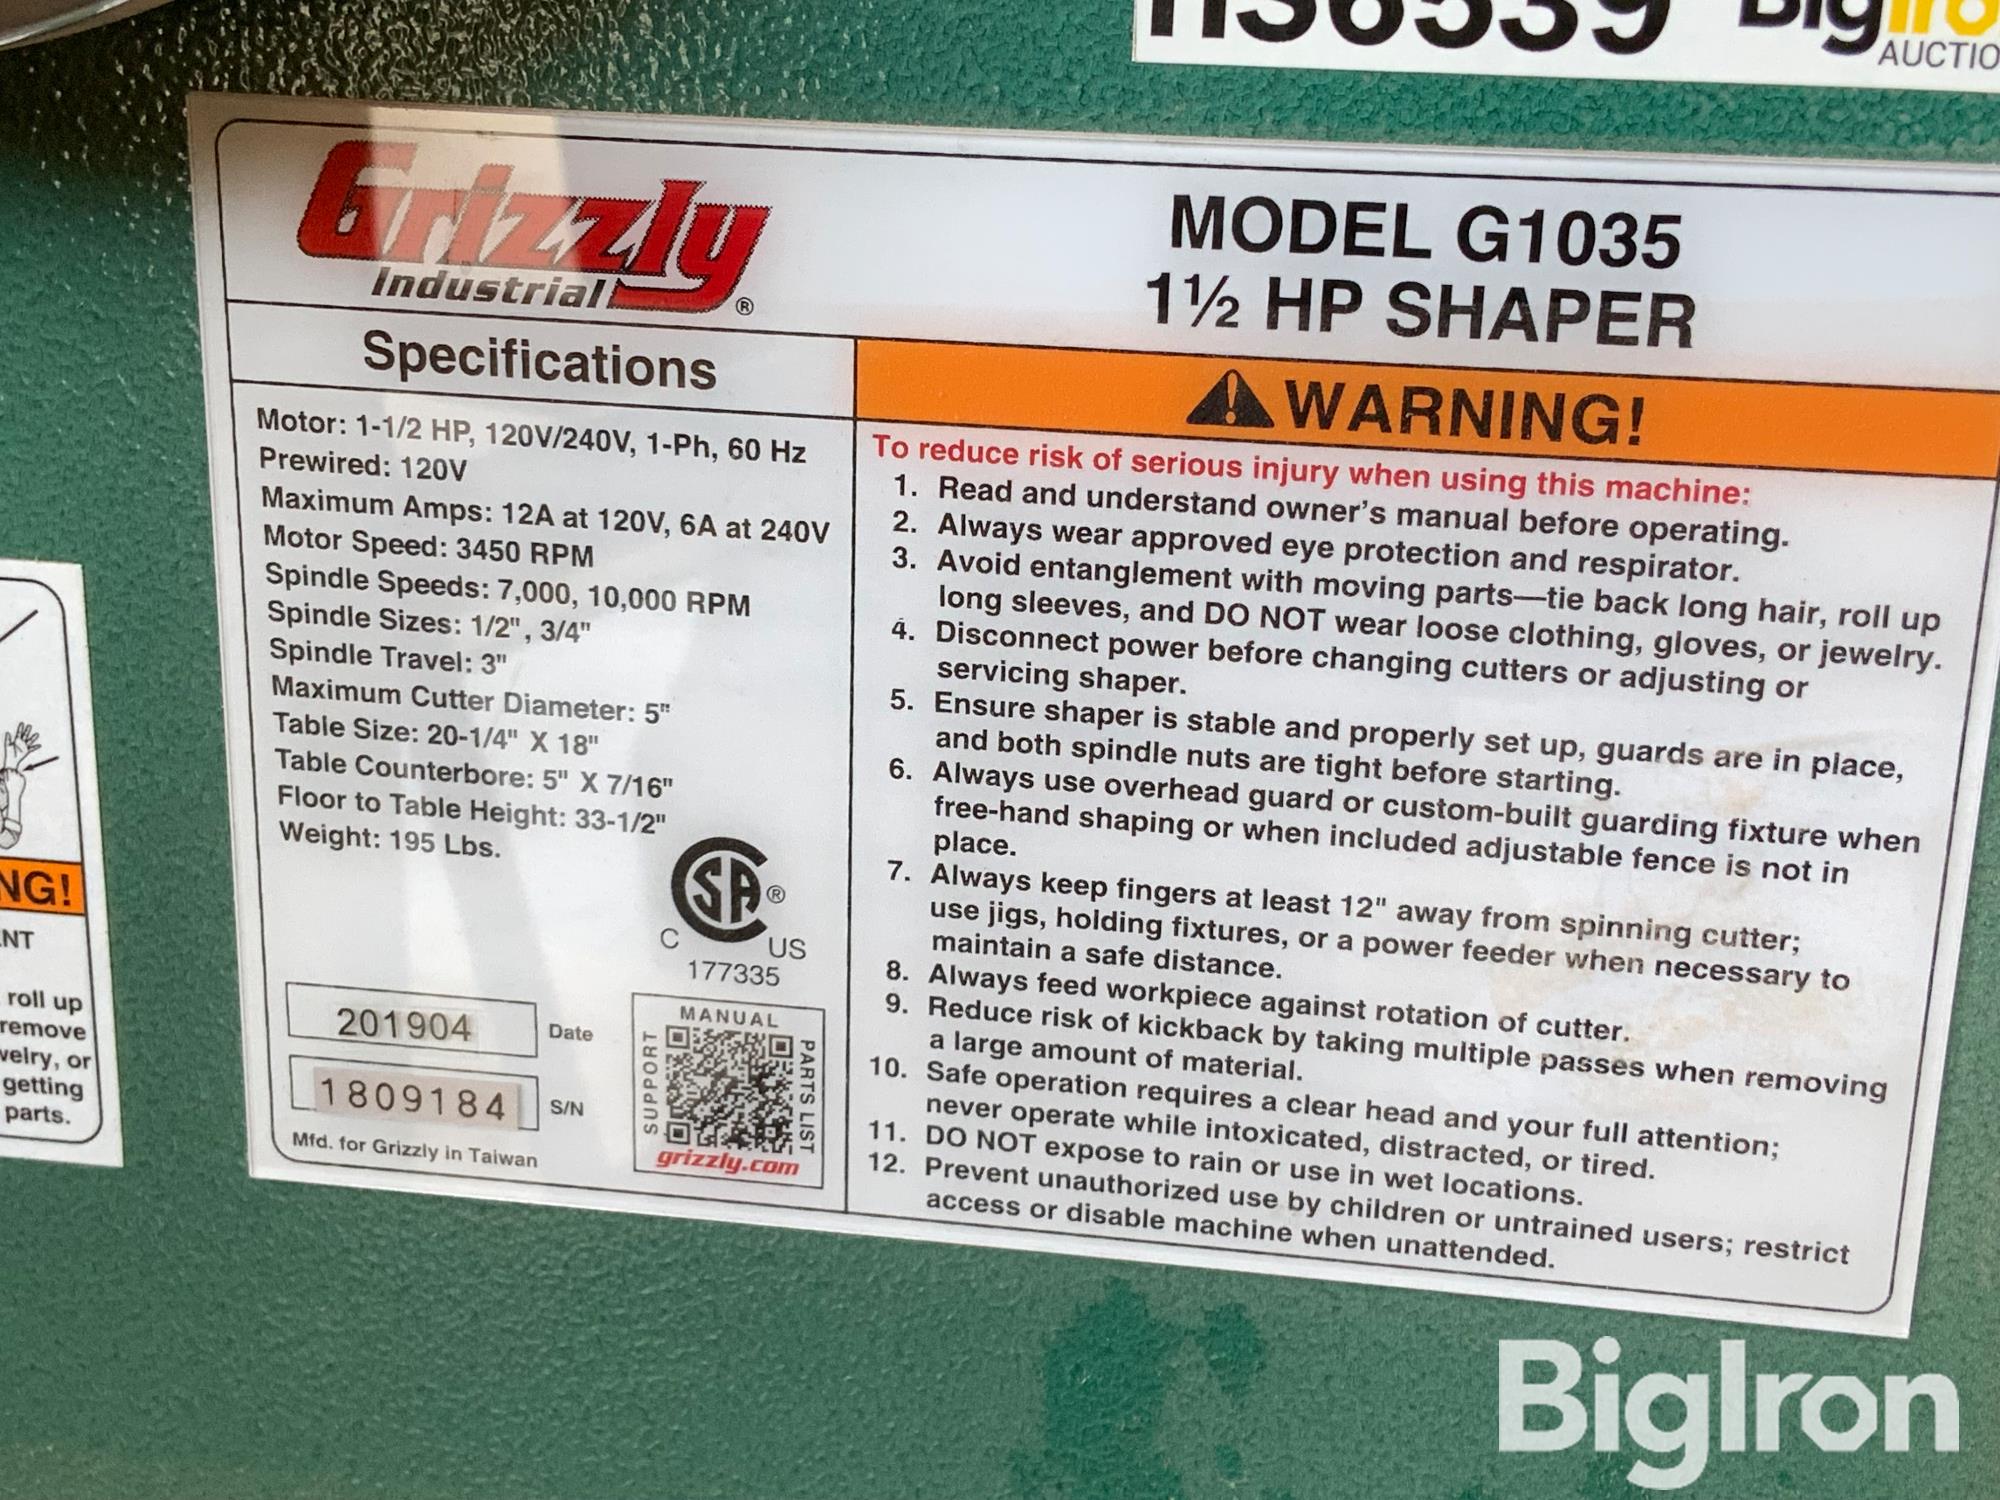 Grizzly G1035 Woodworking Shaper BigIron Auctions